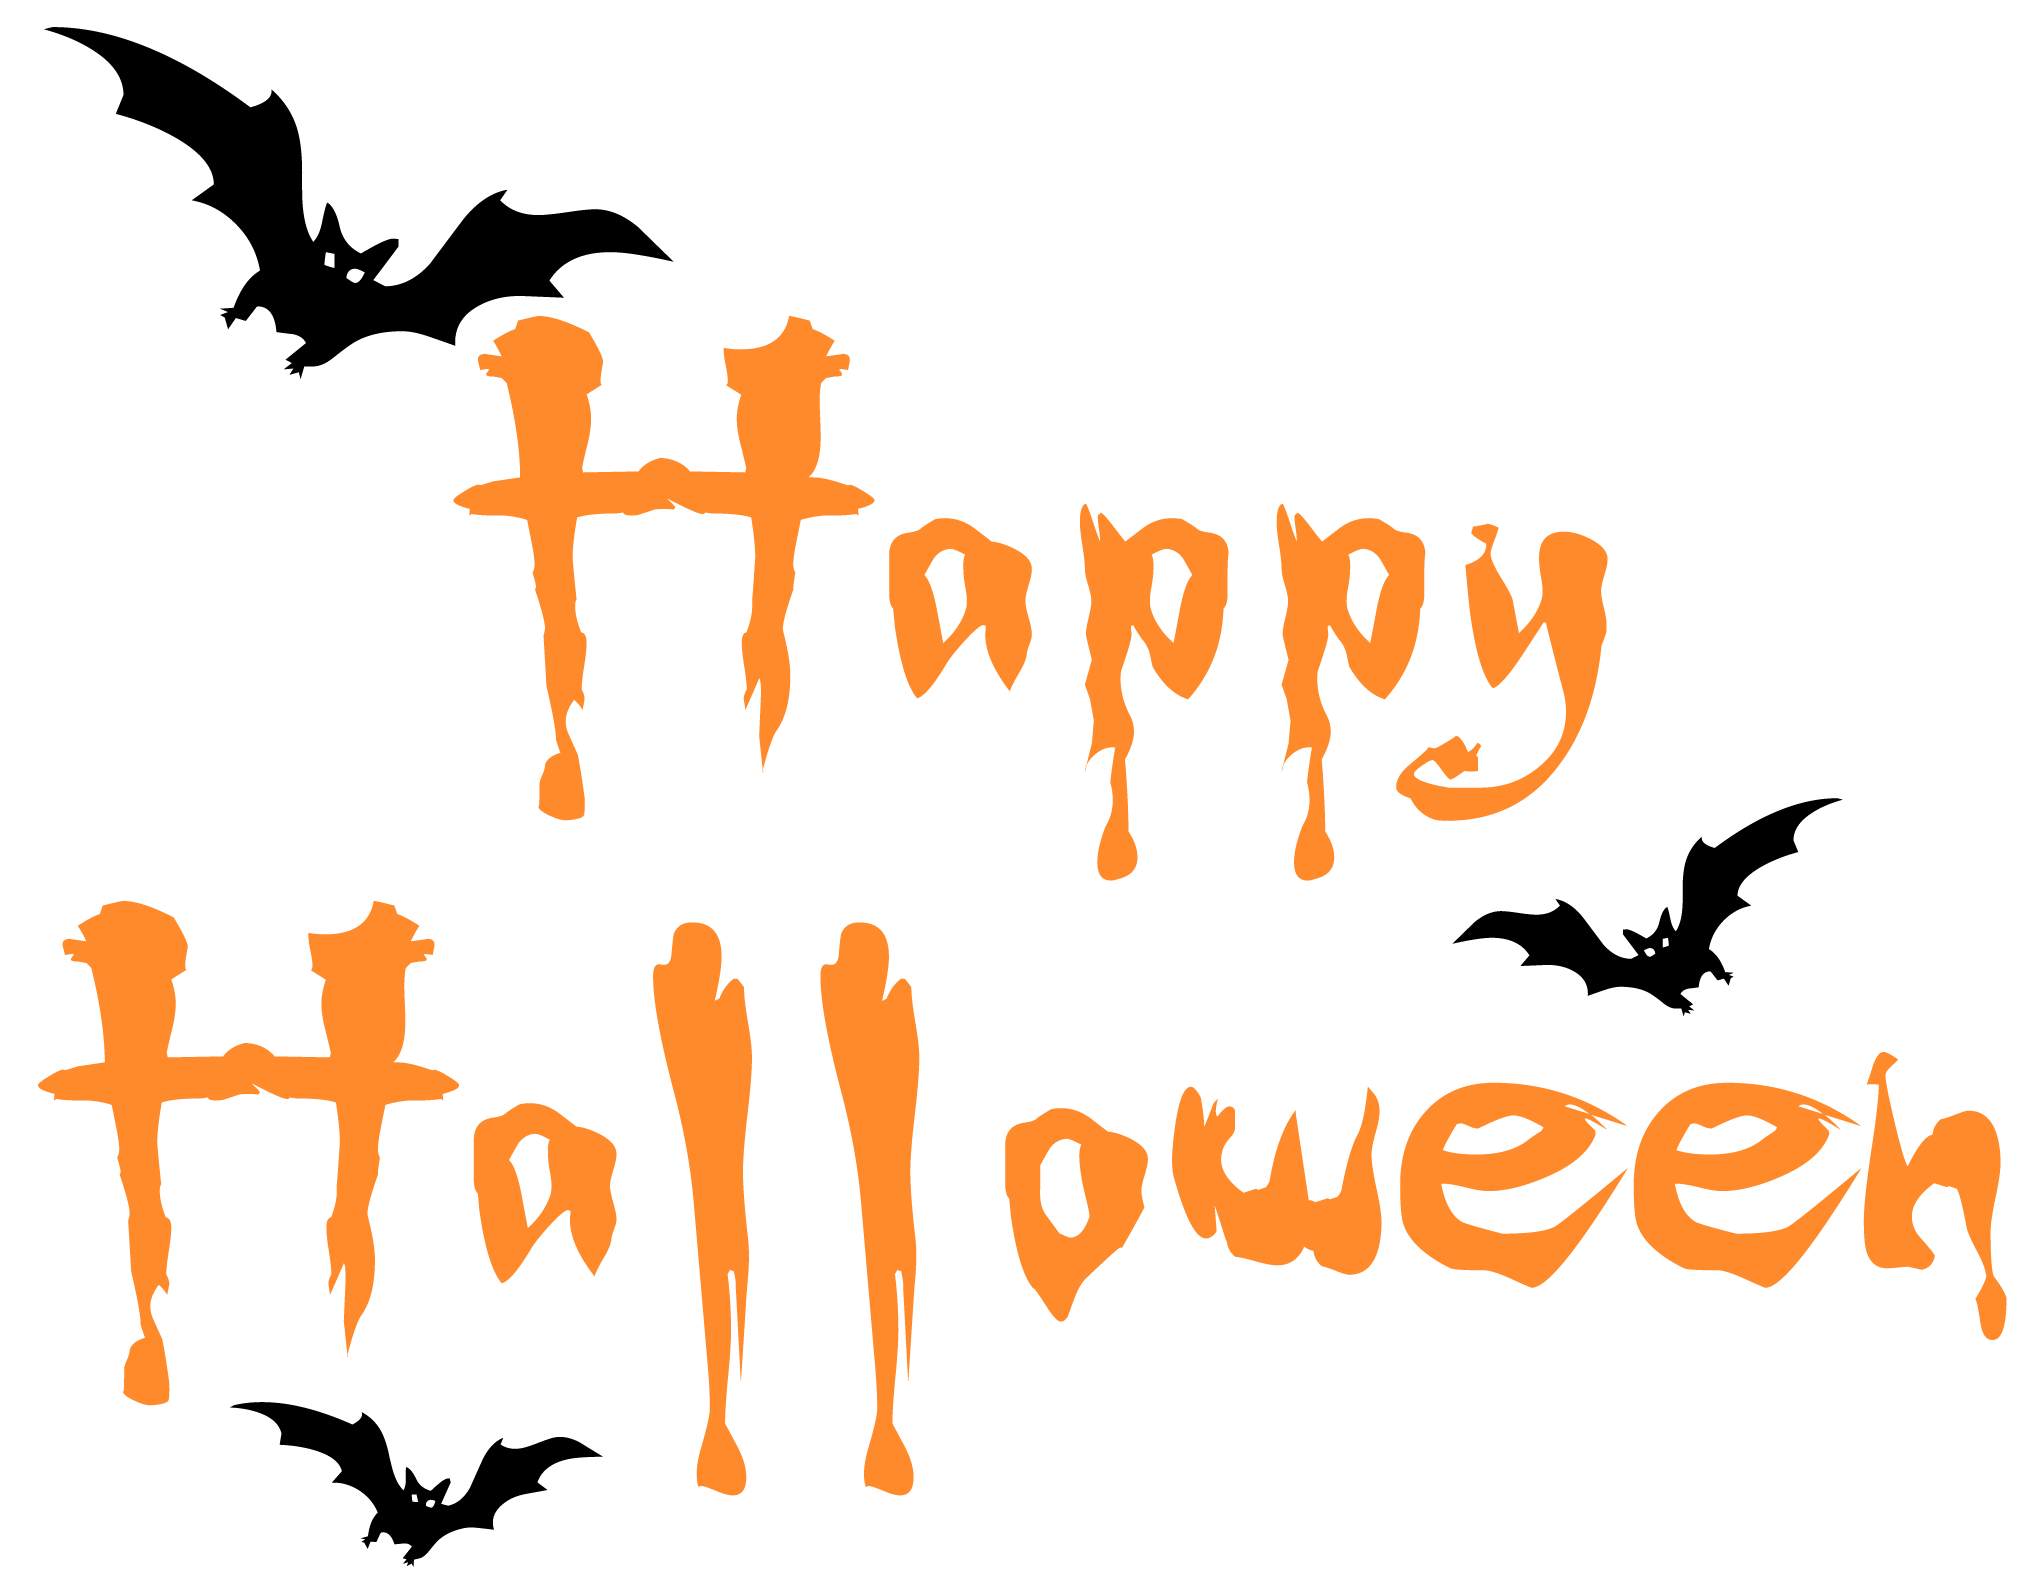 Spooky clip art images on Halloween